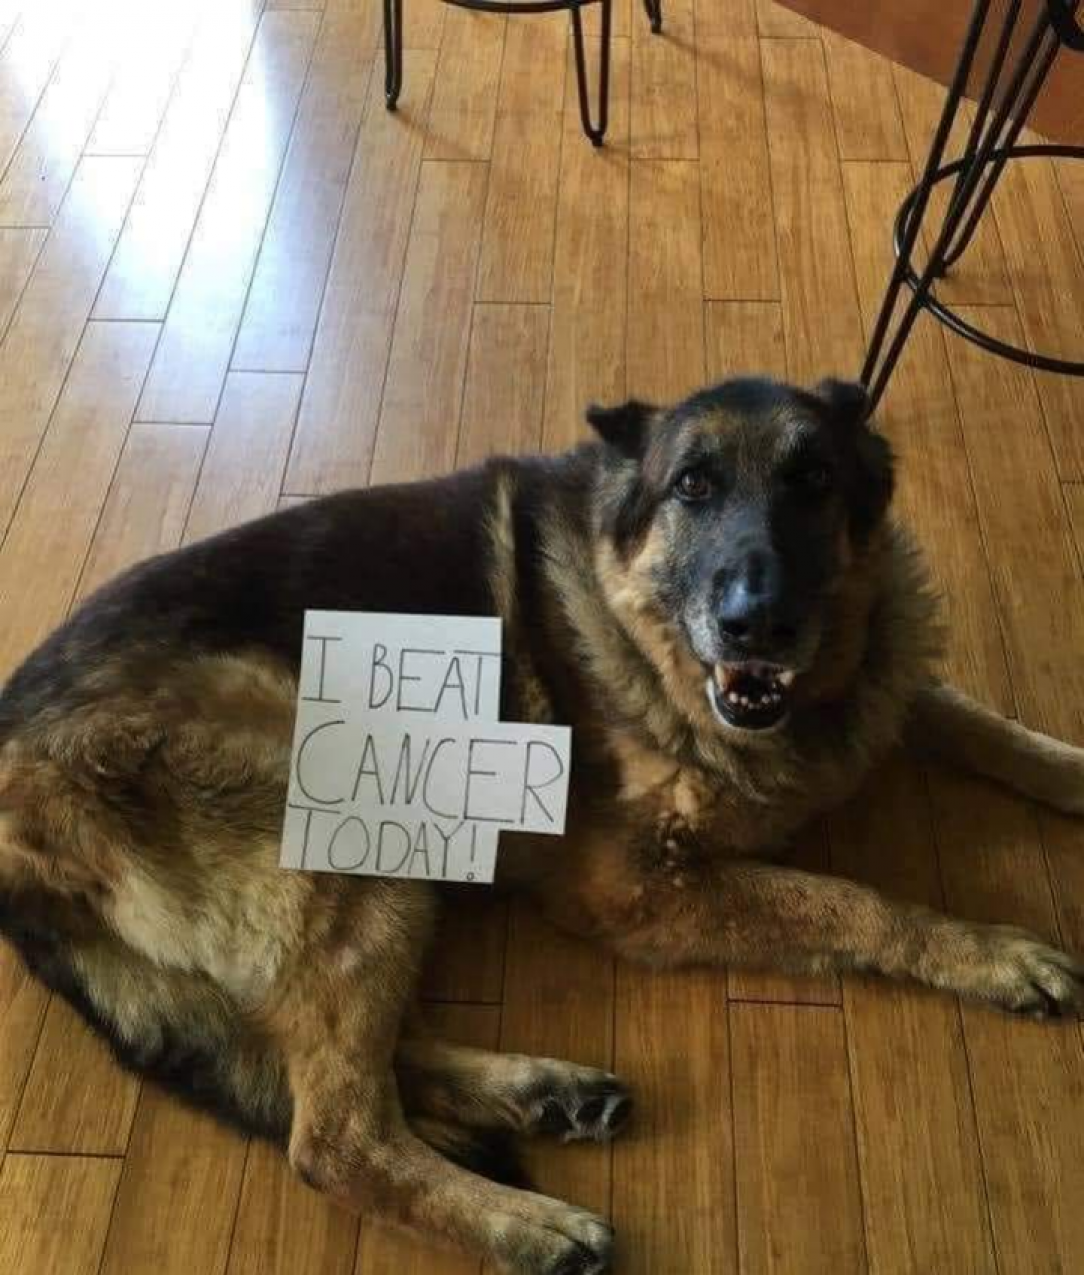 This doggy beat cancer